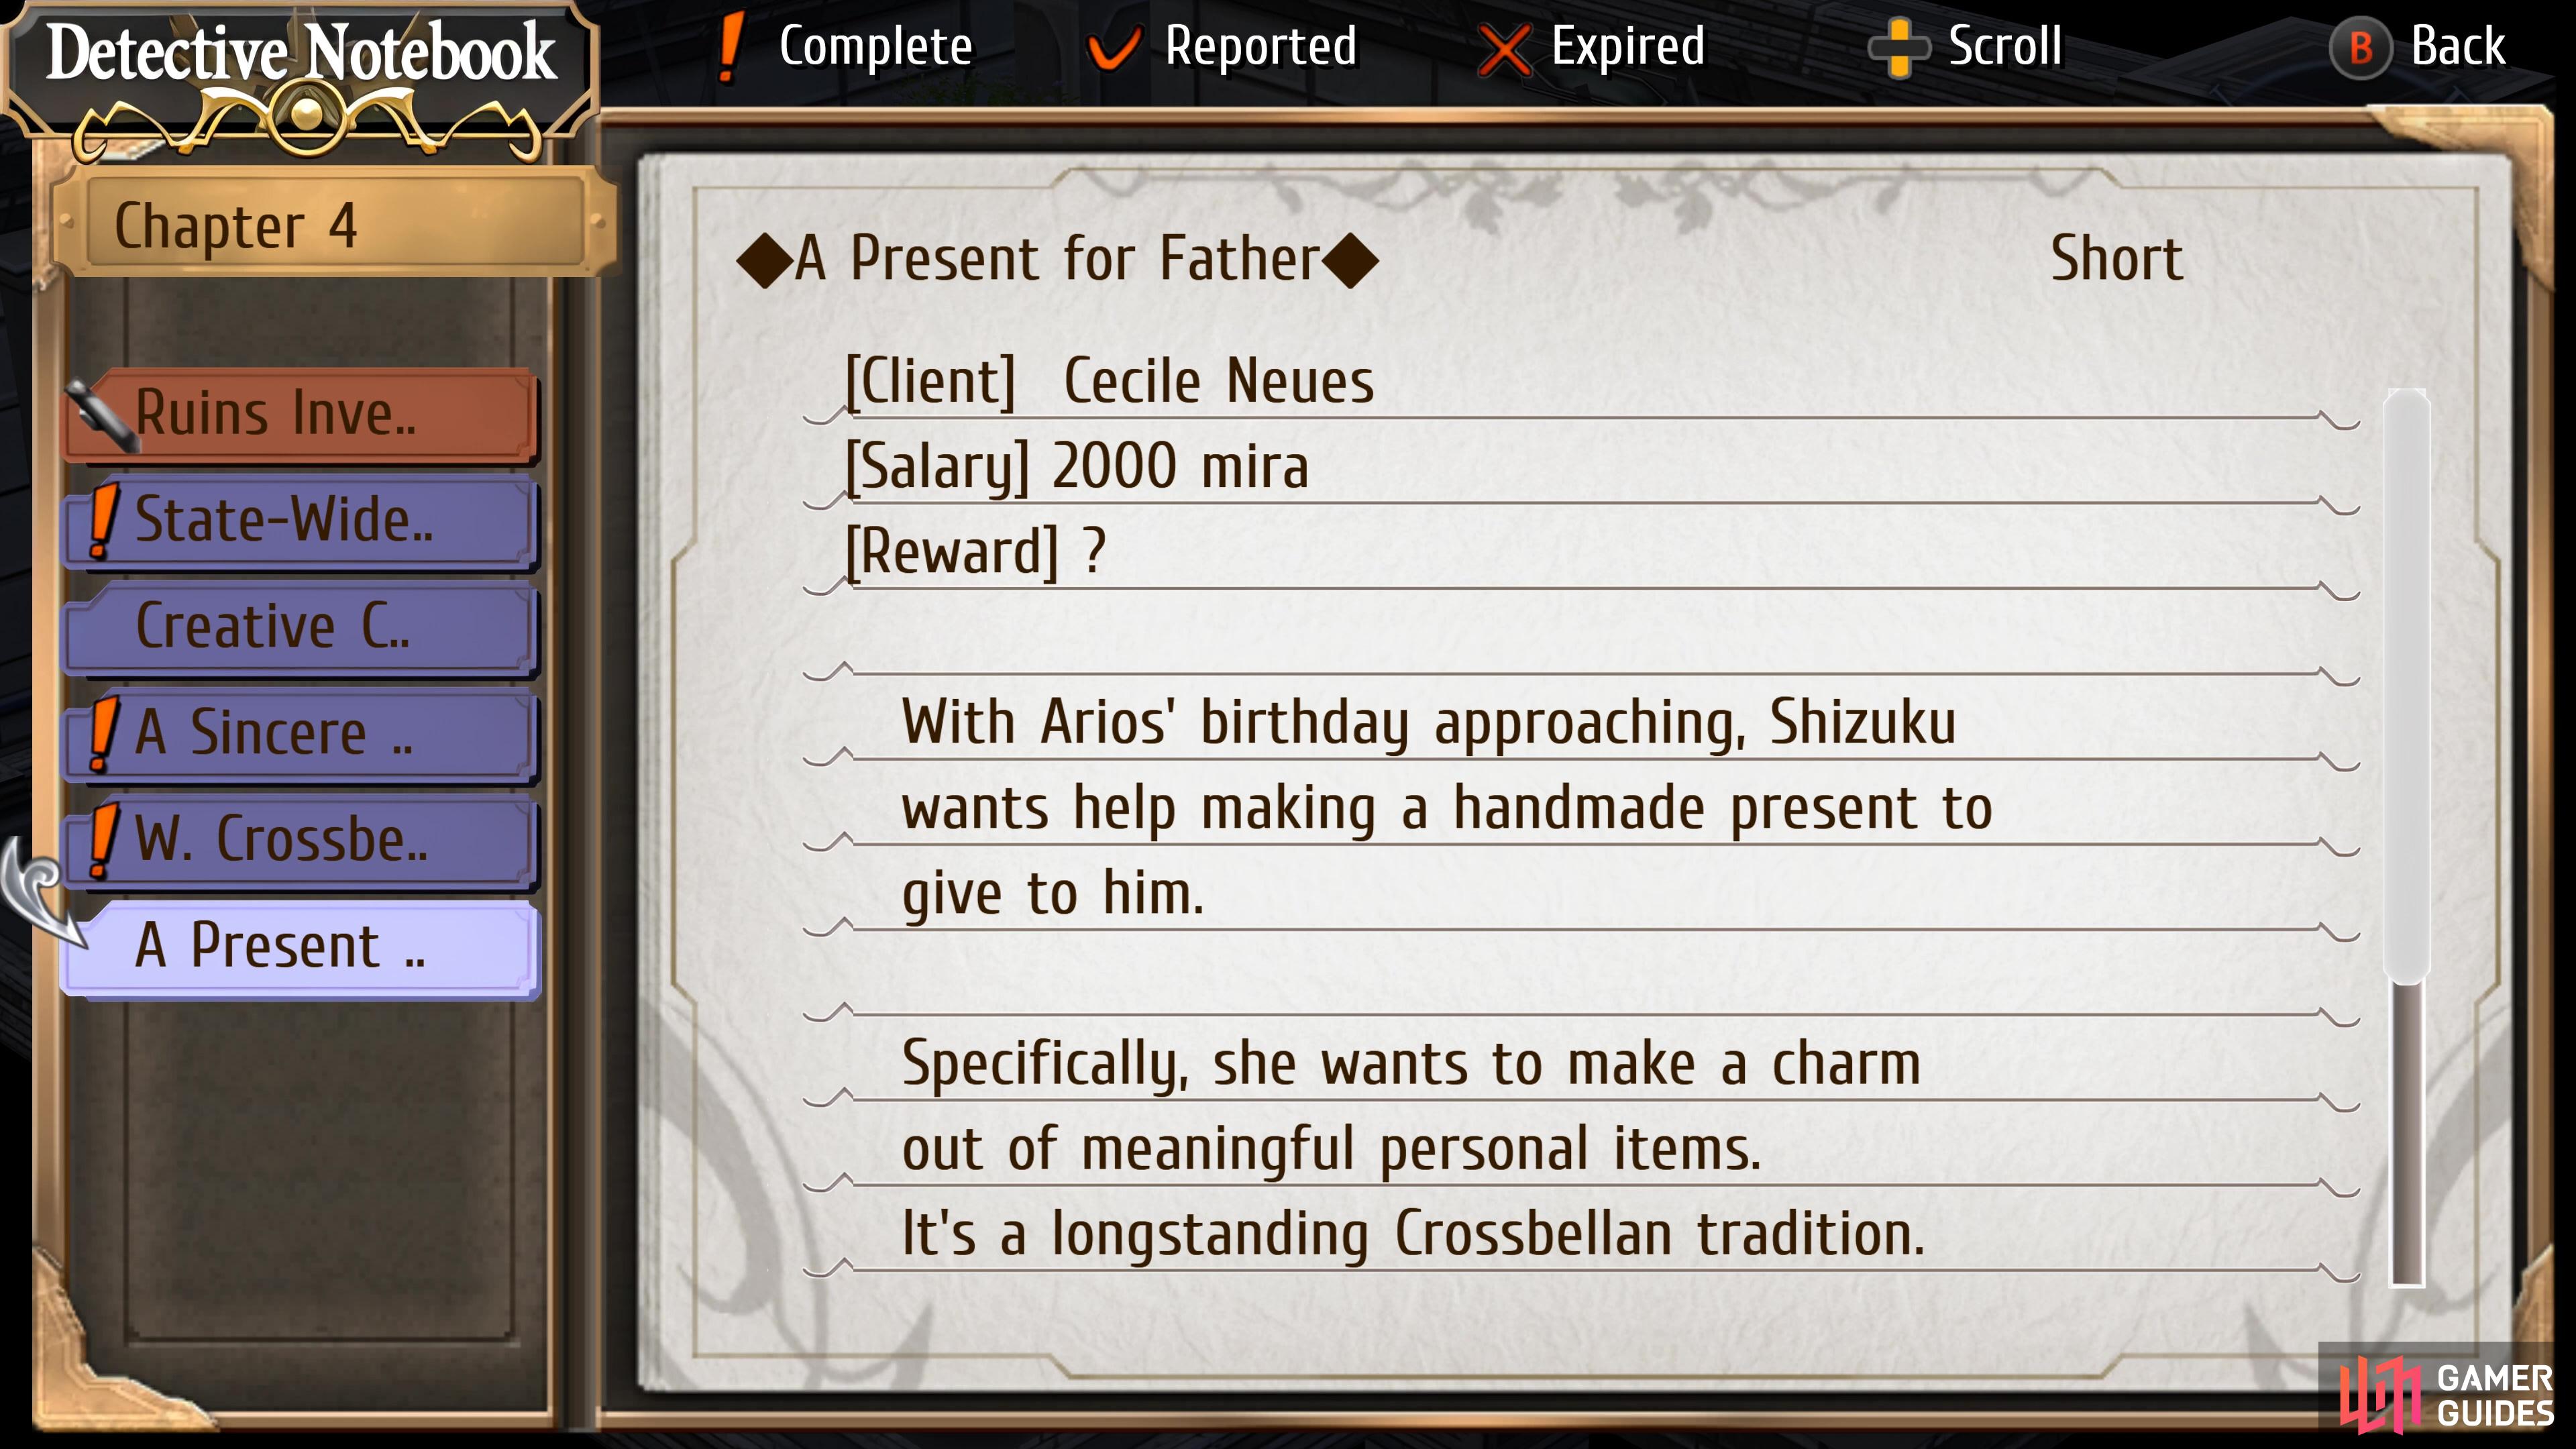 A Present for Father is a hidden request on Chapter 4 Day 1.